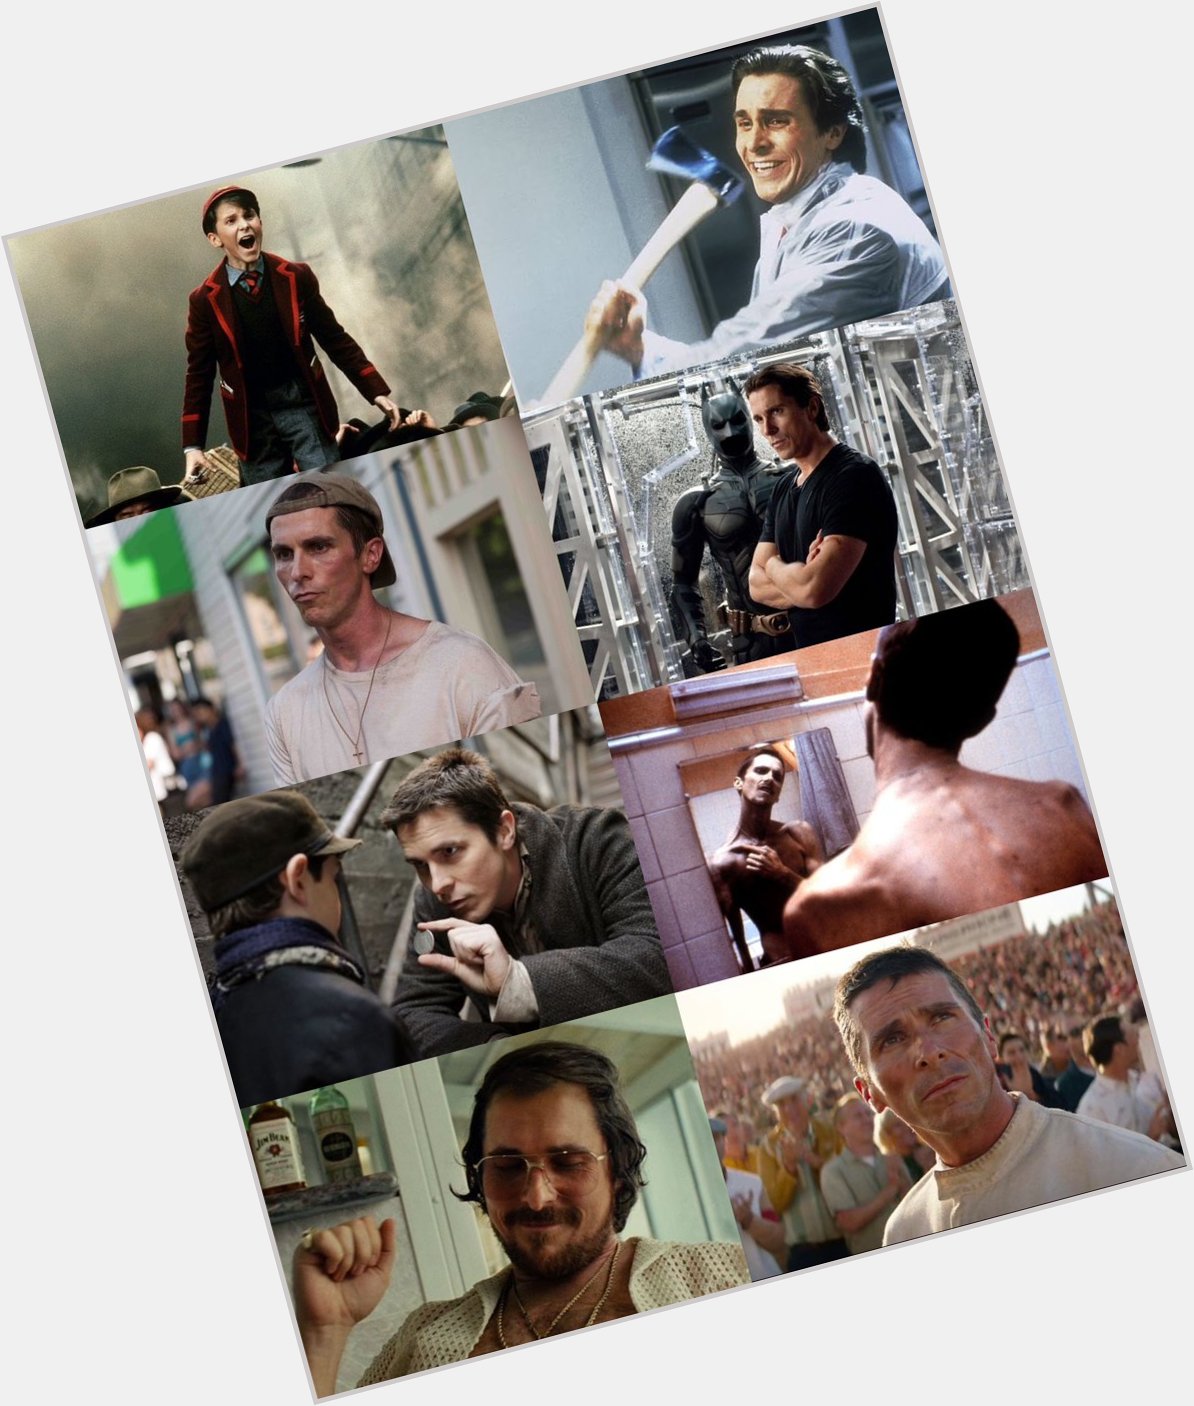 Happy 49th birthday to the man of many faces, Christian Bale! 